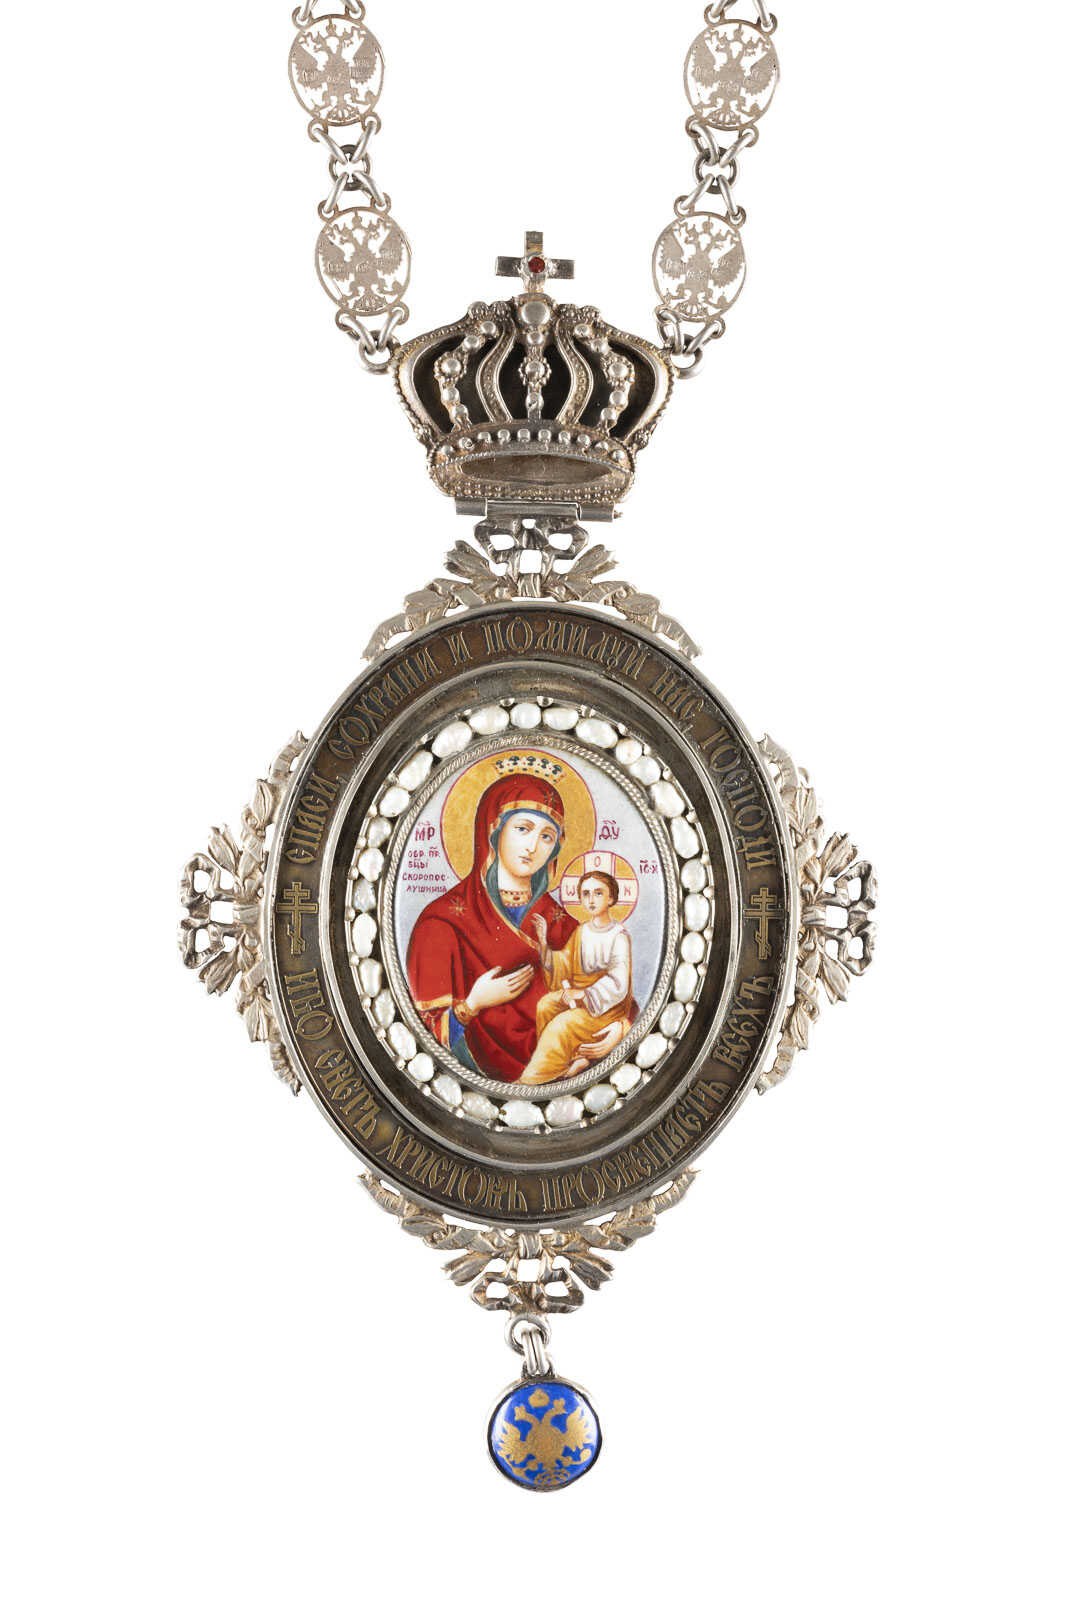 A SILVER AND ENAMEL PANAGIA SHOWING THE ICON OF THE QUIC